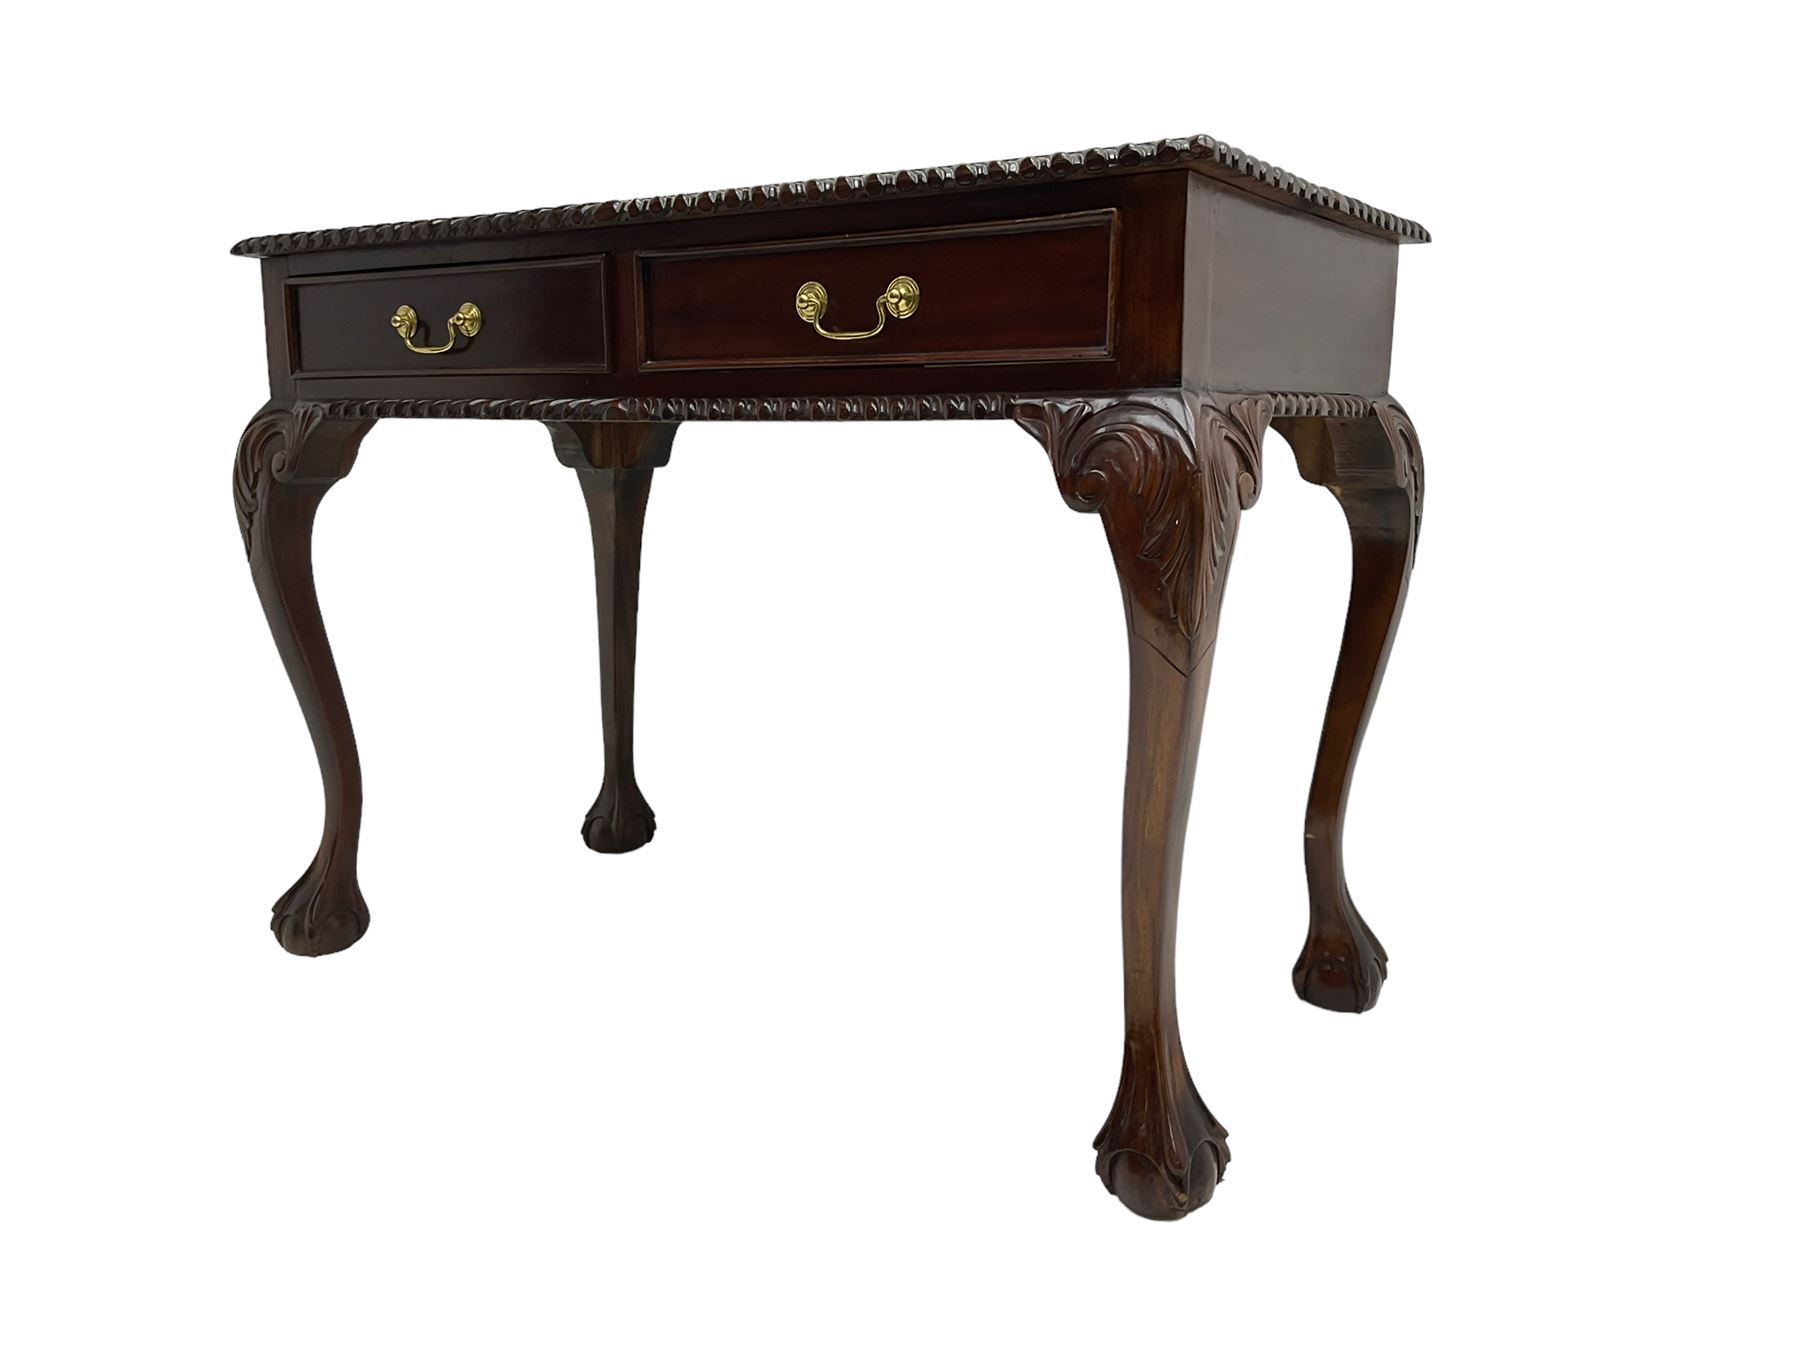 Georgian Chippendale design mahogany side table - Image 2 of 8